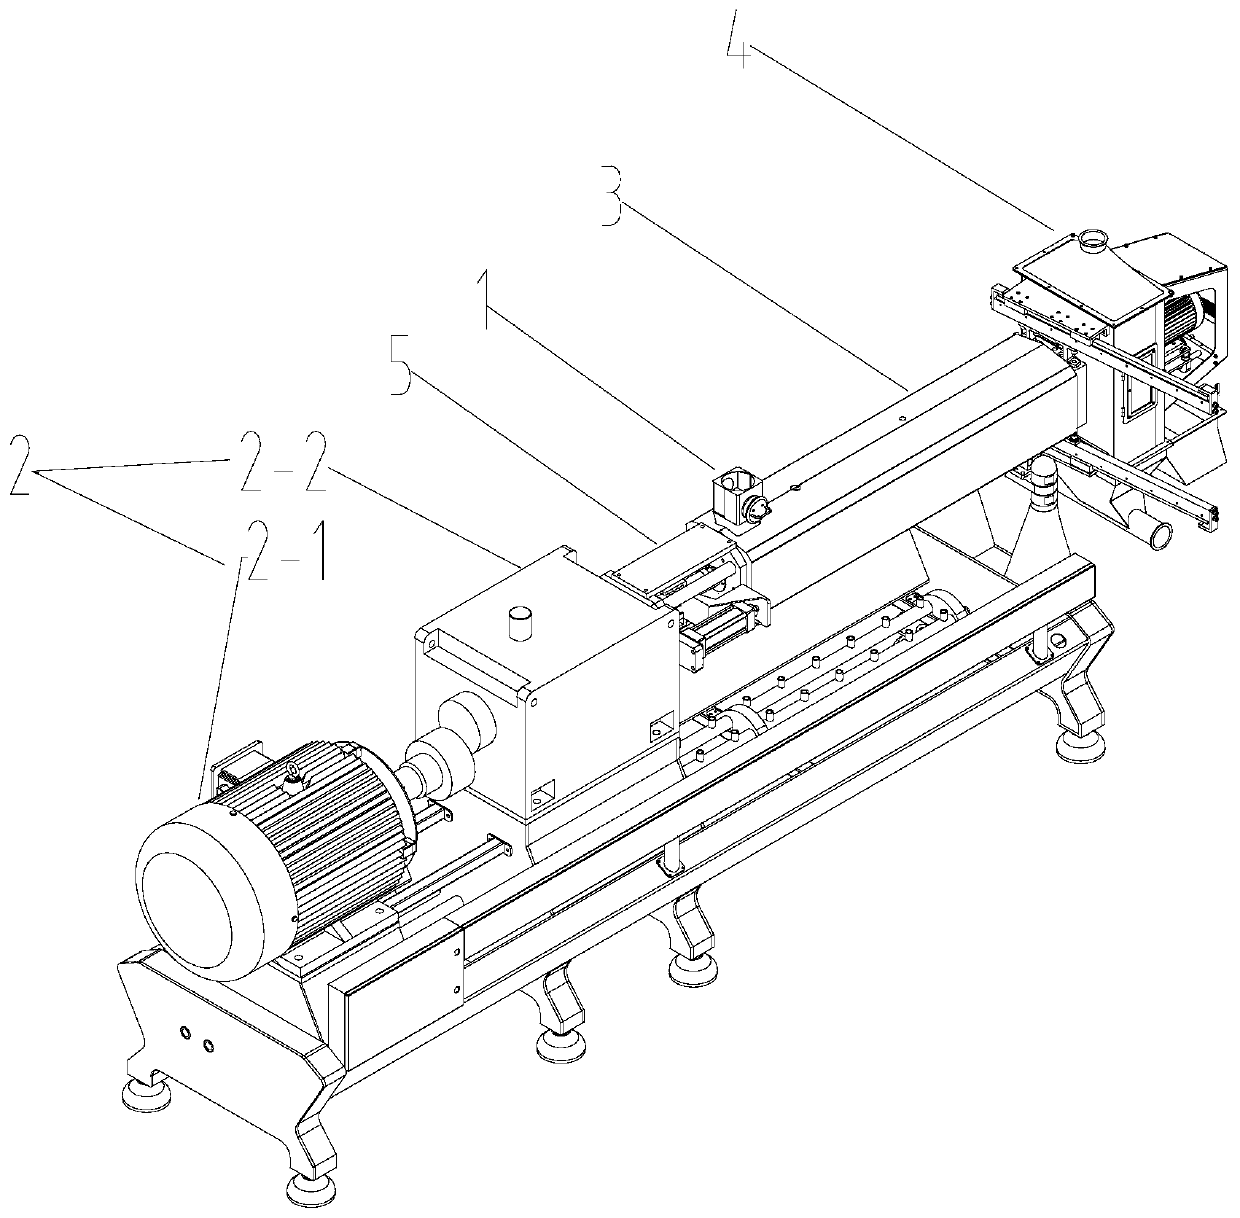 Extruding machine capable of automatically discharging screw rod